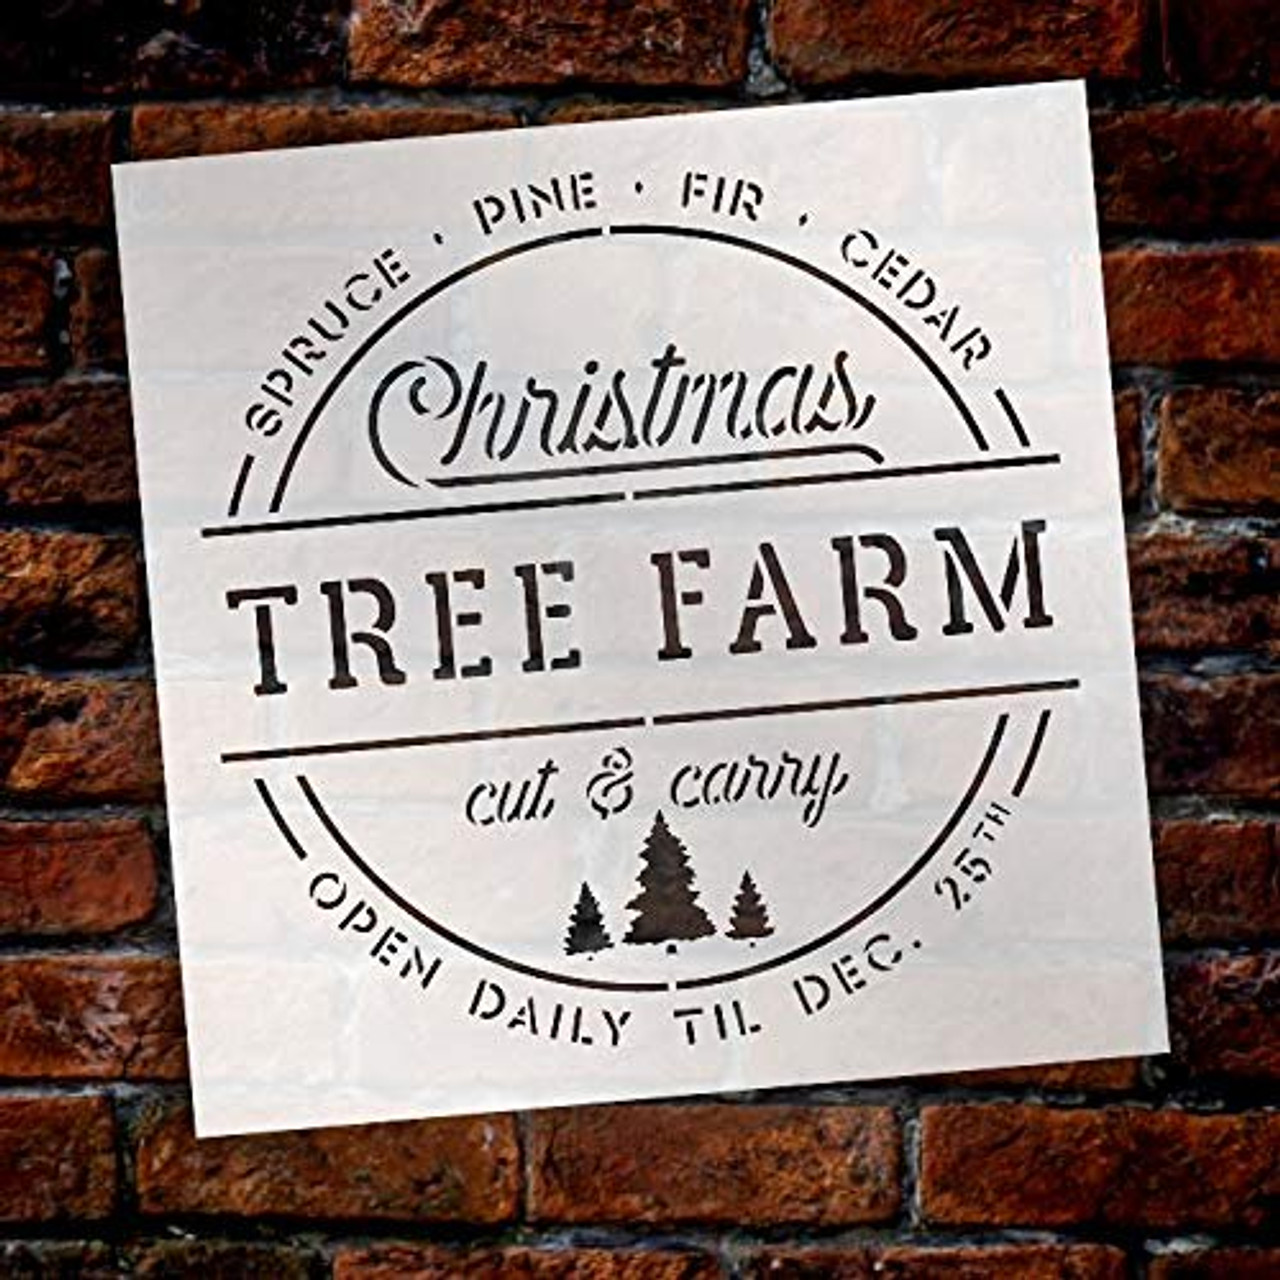 Christmas Tree Farm - Cut & Carry Stencil by StudioR12 | Reusable Mylar Template | Use to Paint Wood Signs - Pallets - Walls - Banners - DIY Tree Farm Decor - Select Size